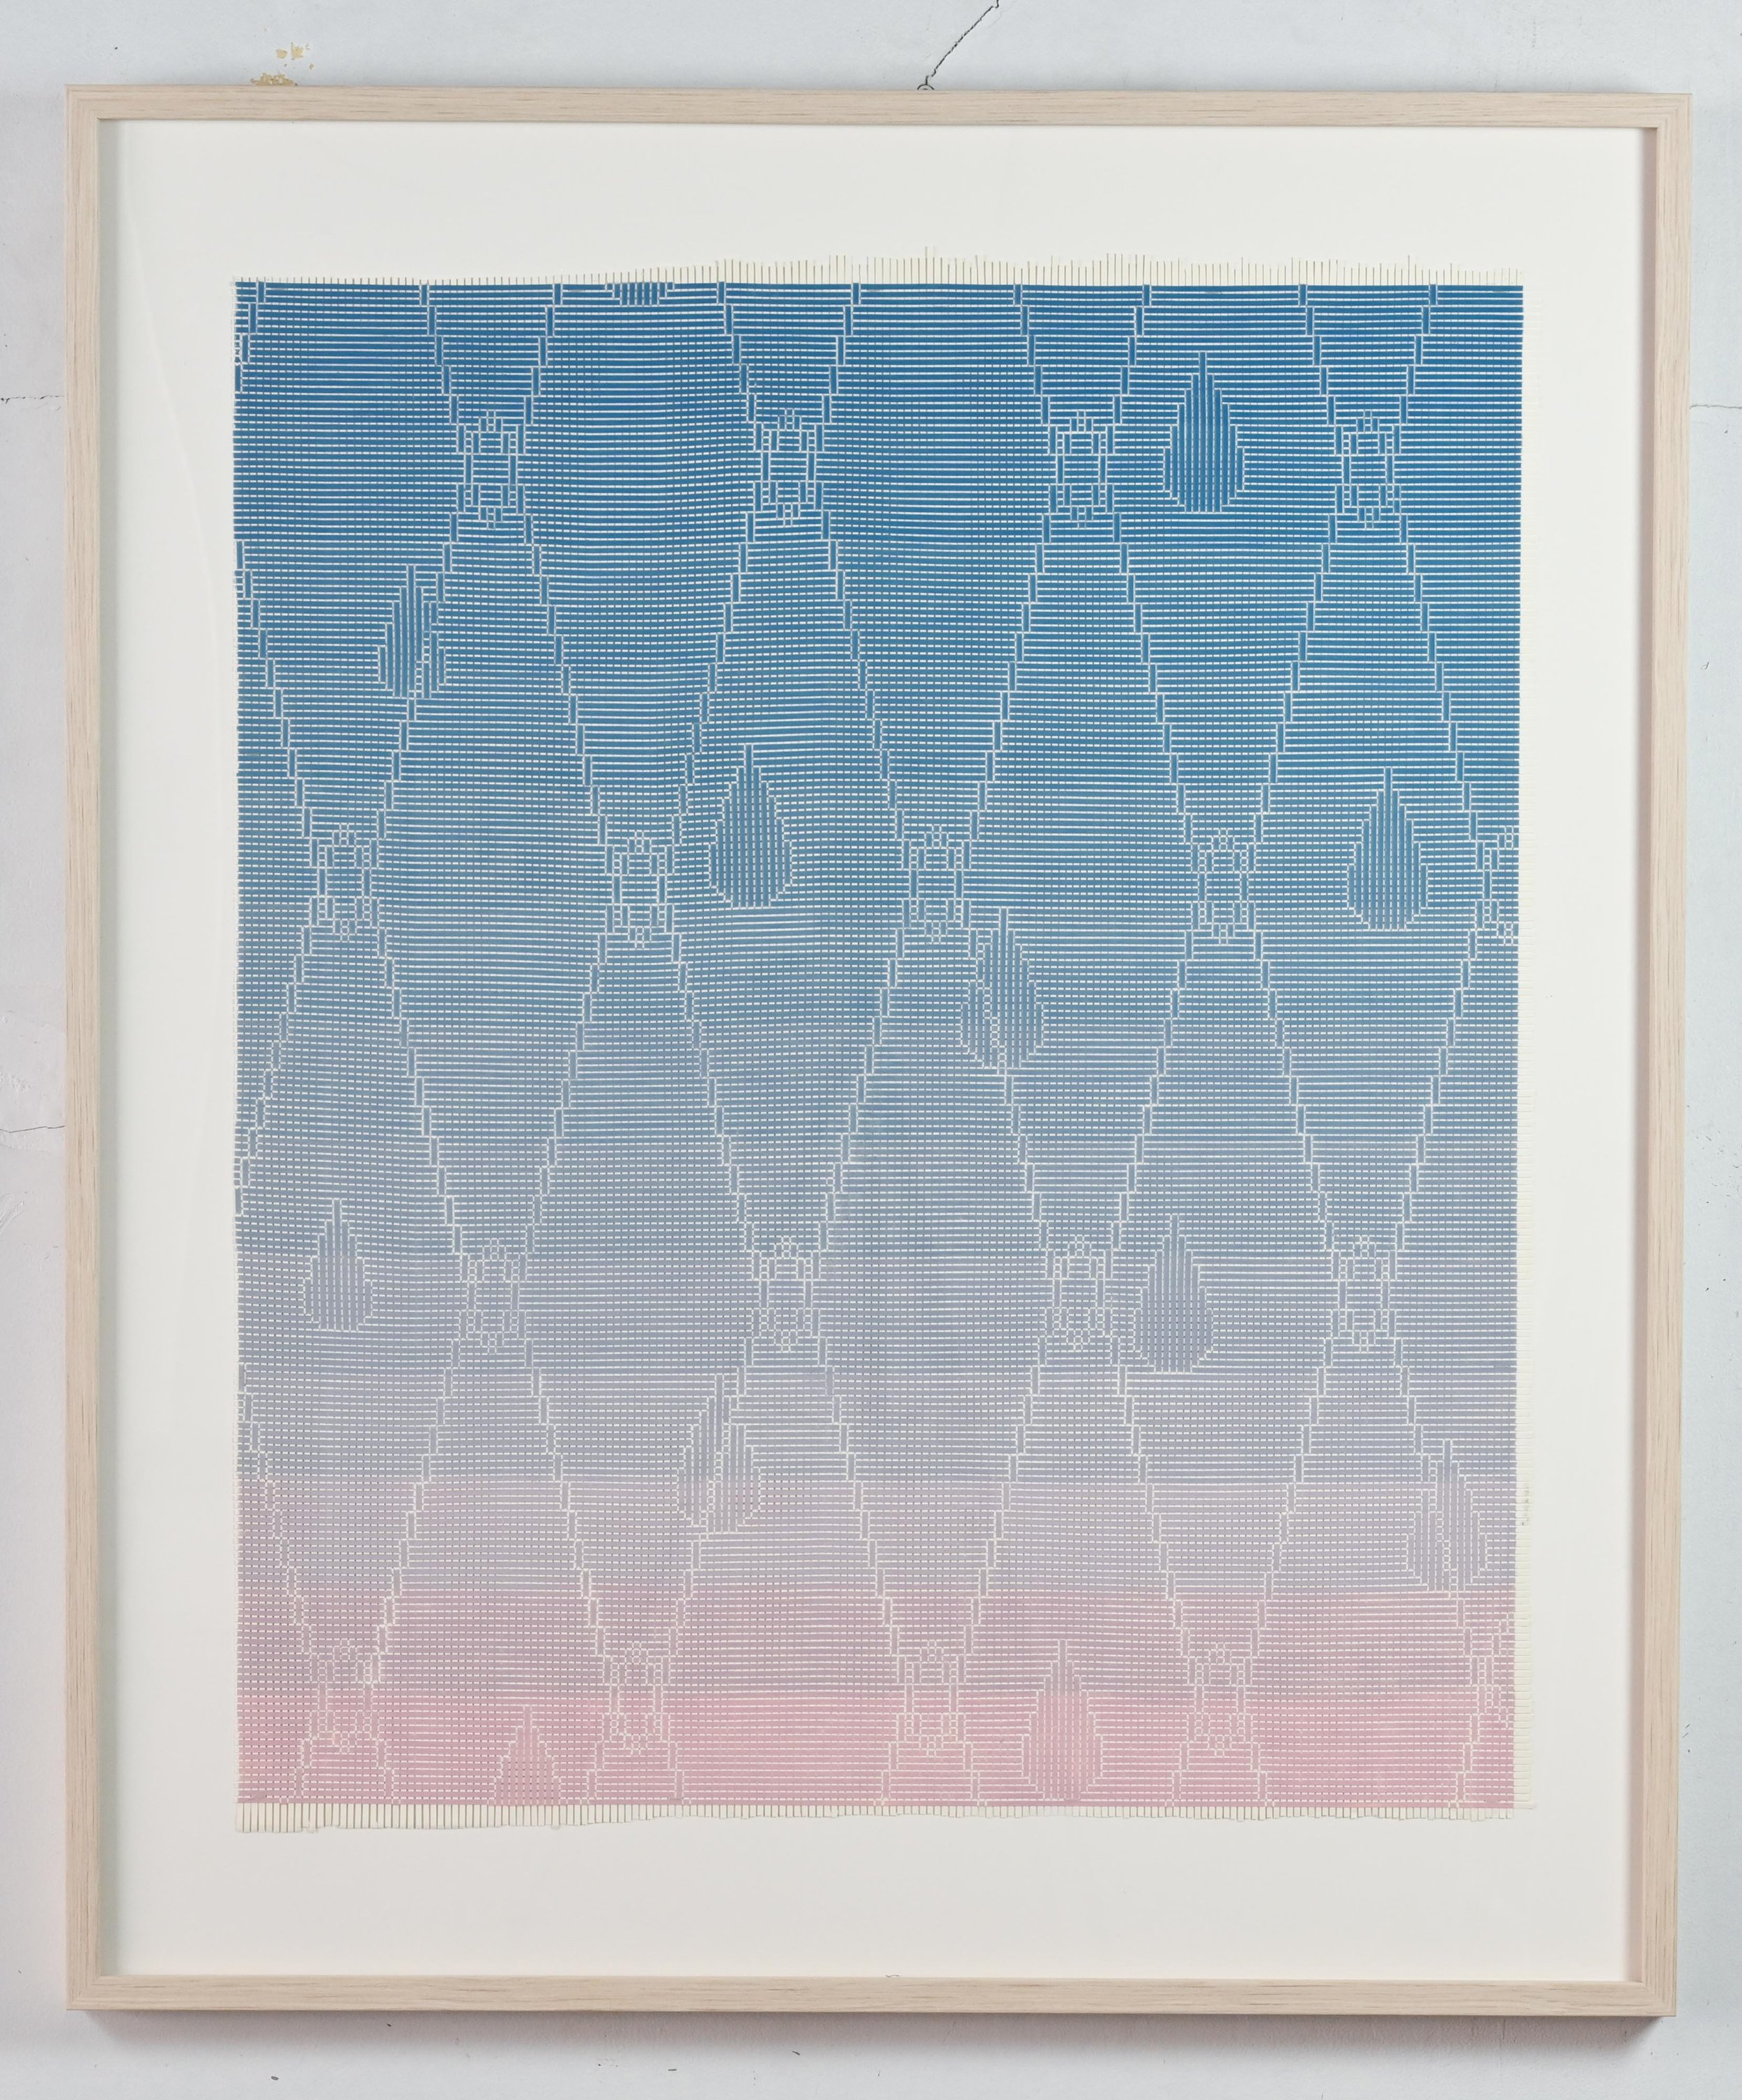   Strangers , 2023 intaglio ink on woven paper 37 x 44 in  framed 44.25 x 37.25 in 